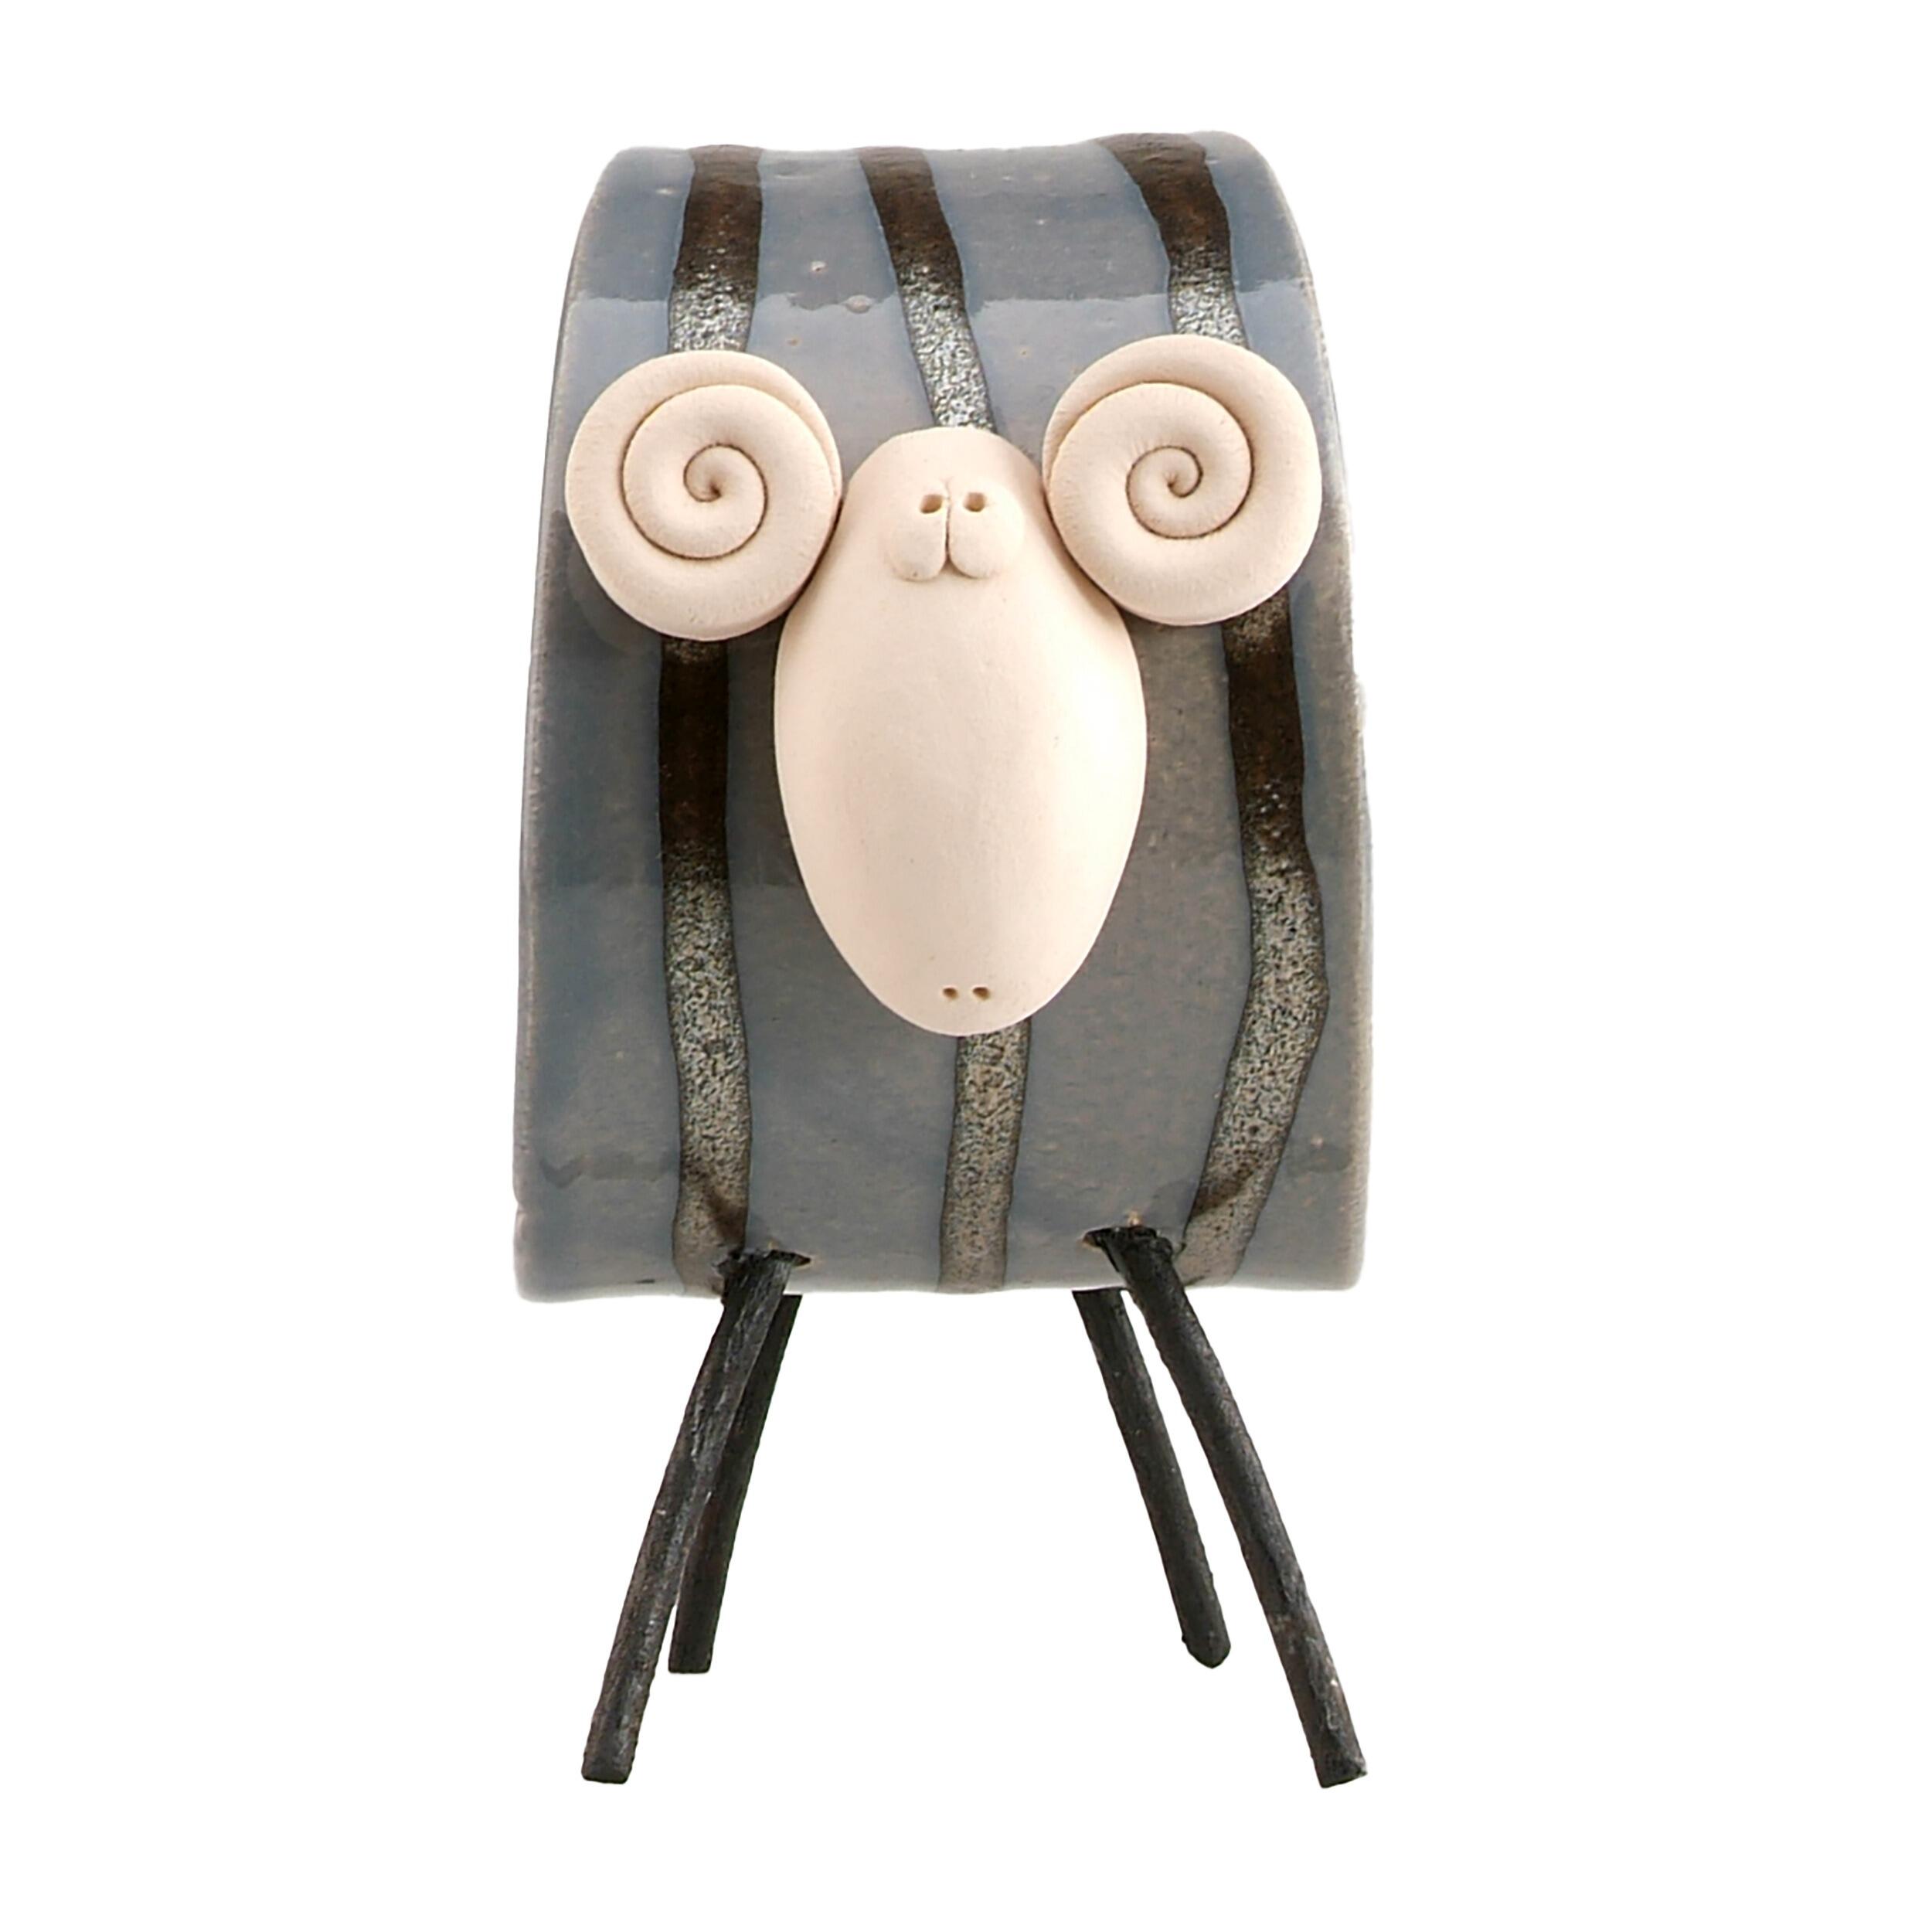 Handmade Stylish Ceramic Ram in elegant grey with captivating scroll design. Unique, sophisticated decor crafted from ceramic, adding artistry and elegance to your space.